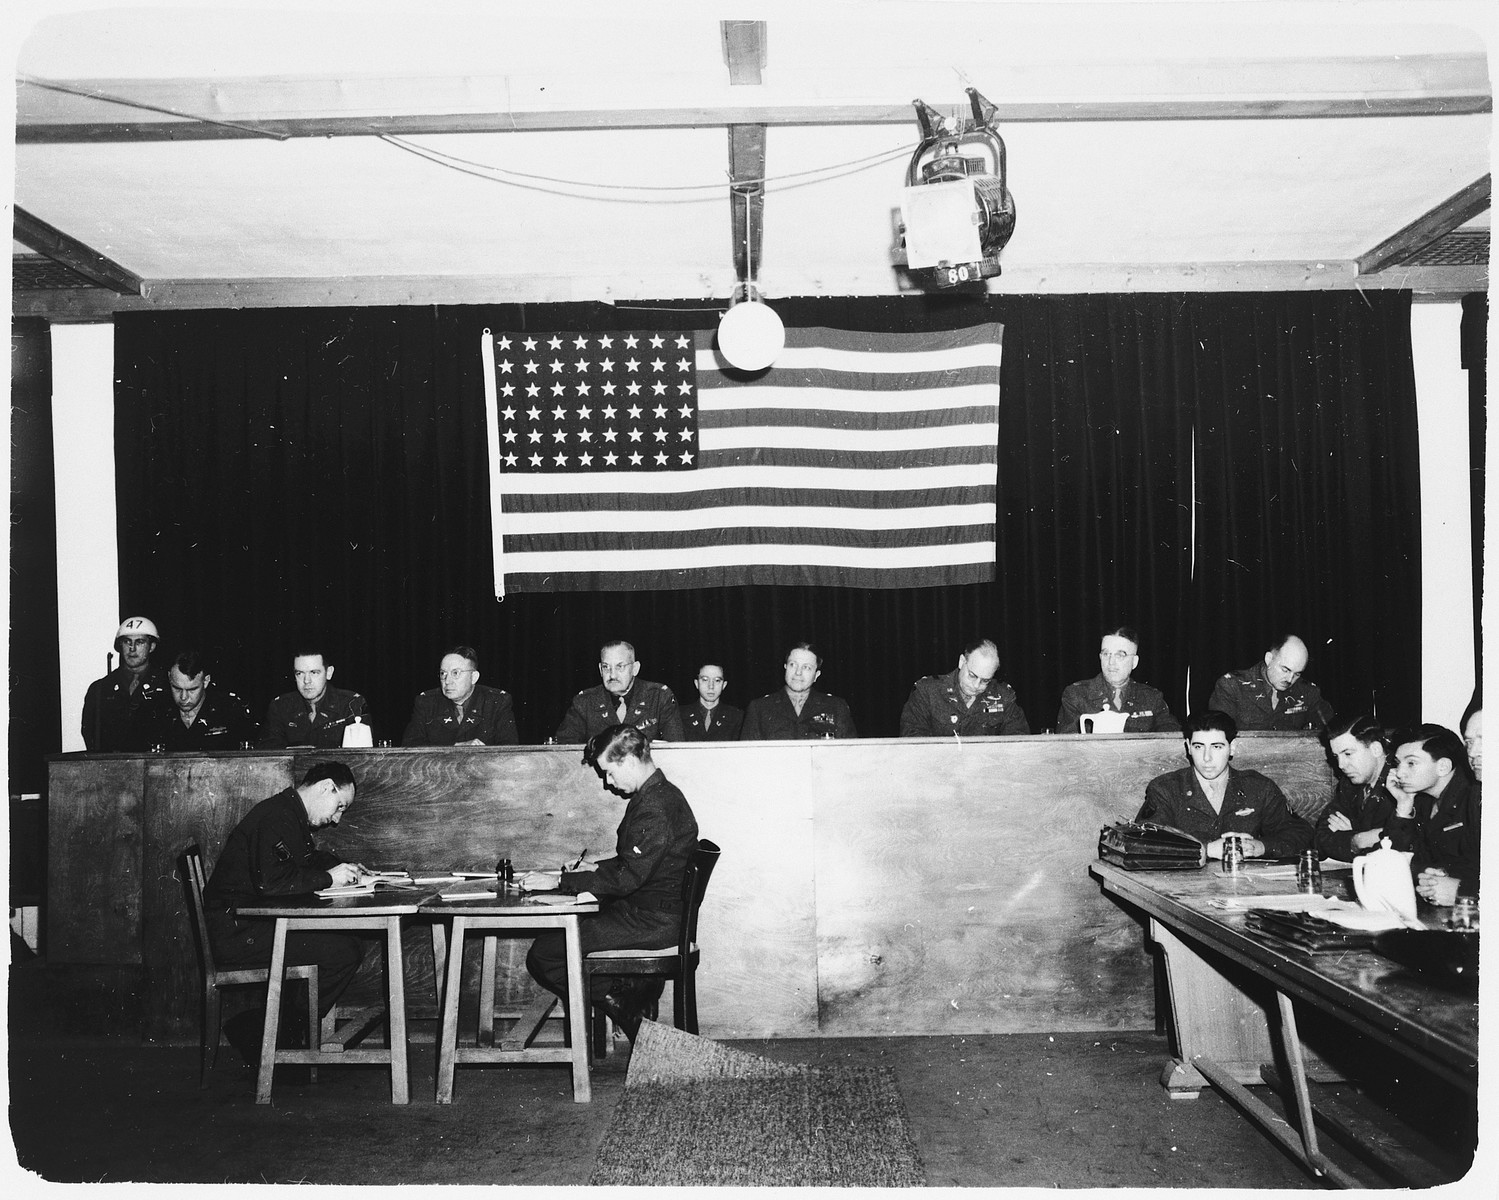 View of the judges bench of the Dachau trial.  A large American flag hangs behind them.

Interpreters for the defense sit at the table to the right of the judges. Among those pictured is Otto Ludwig Stein, third from the left, a 20 year old Sargeant in the US Army. Otto was a Jewish refugee that left Berlin in 1939 and immigrated to the United States. He joined the Army in 1944 and was given the choice of going to Europe or the Pacific, he chose Europe.